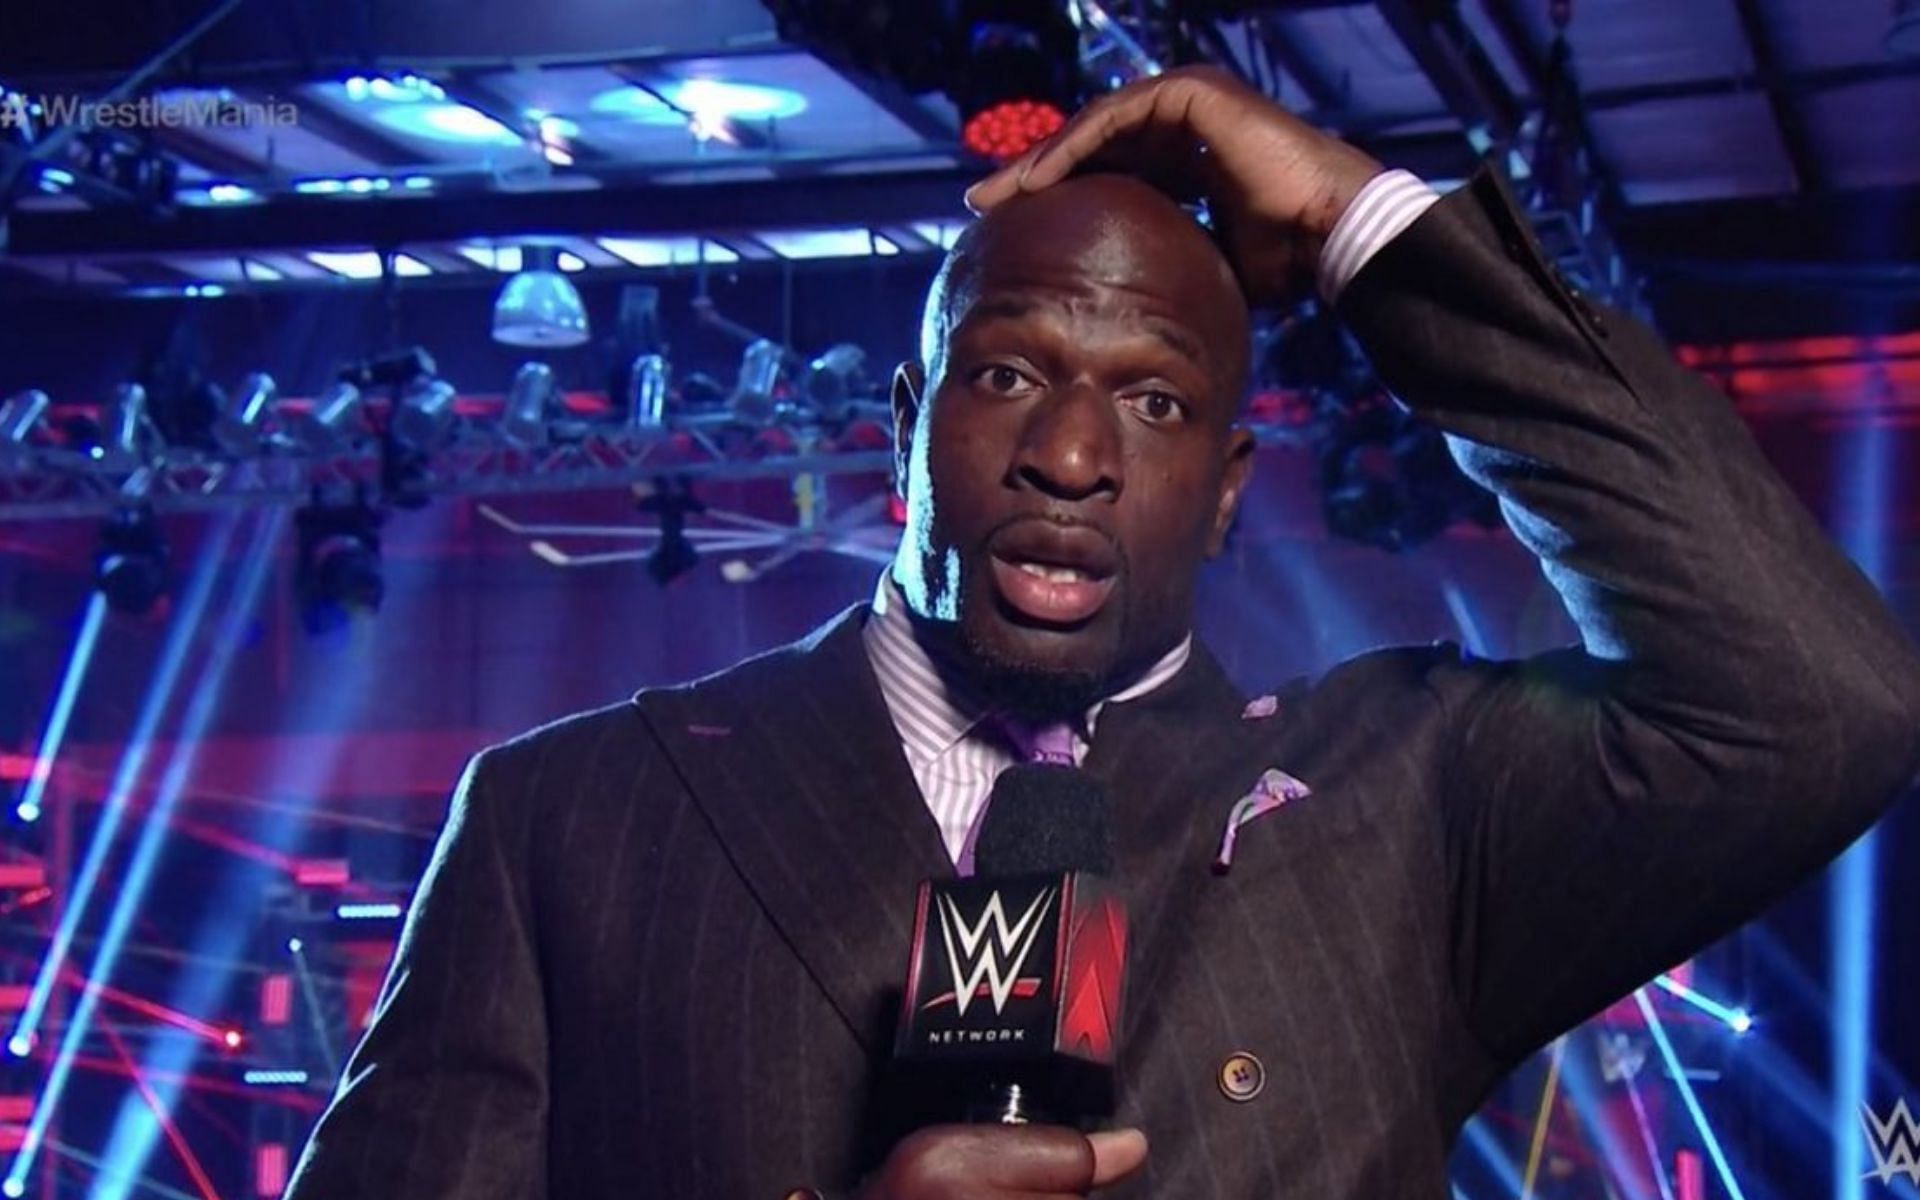 There is one moment that stands out in Titus O